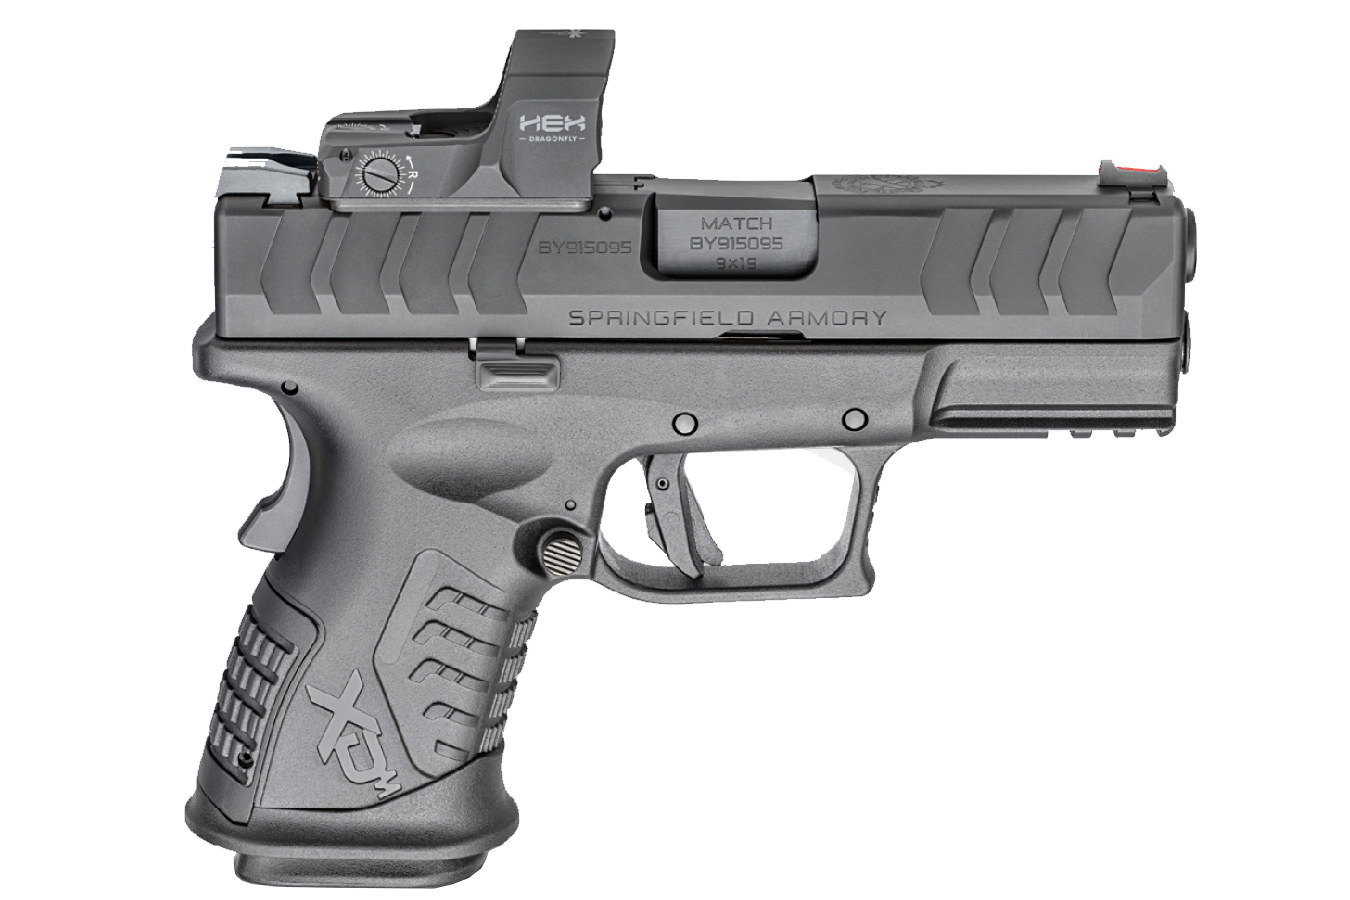 XDM ELITE 3.8 OSP COMPACT 9MM PISTOL WITH HEX DRAGONFLY RED DOT